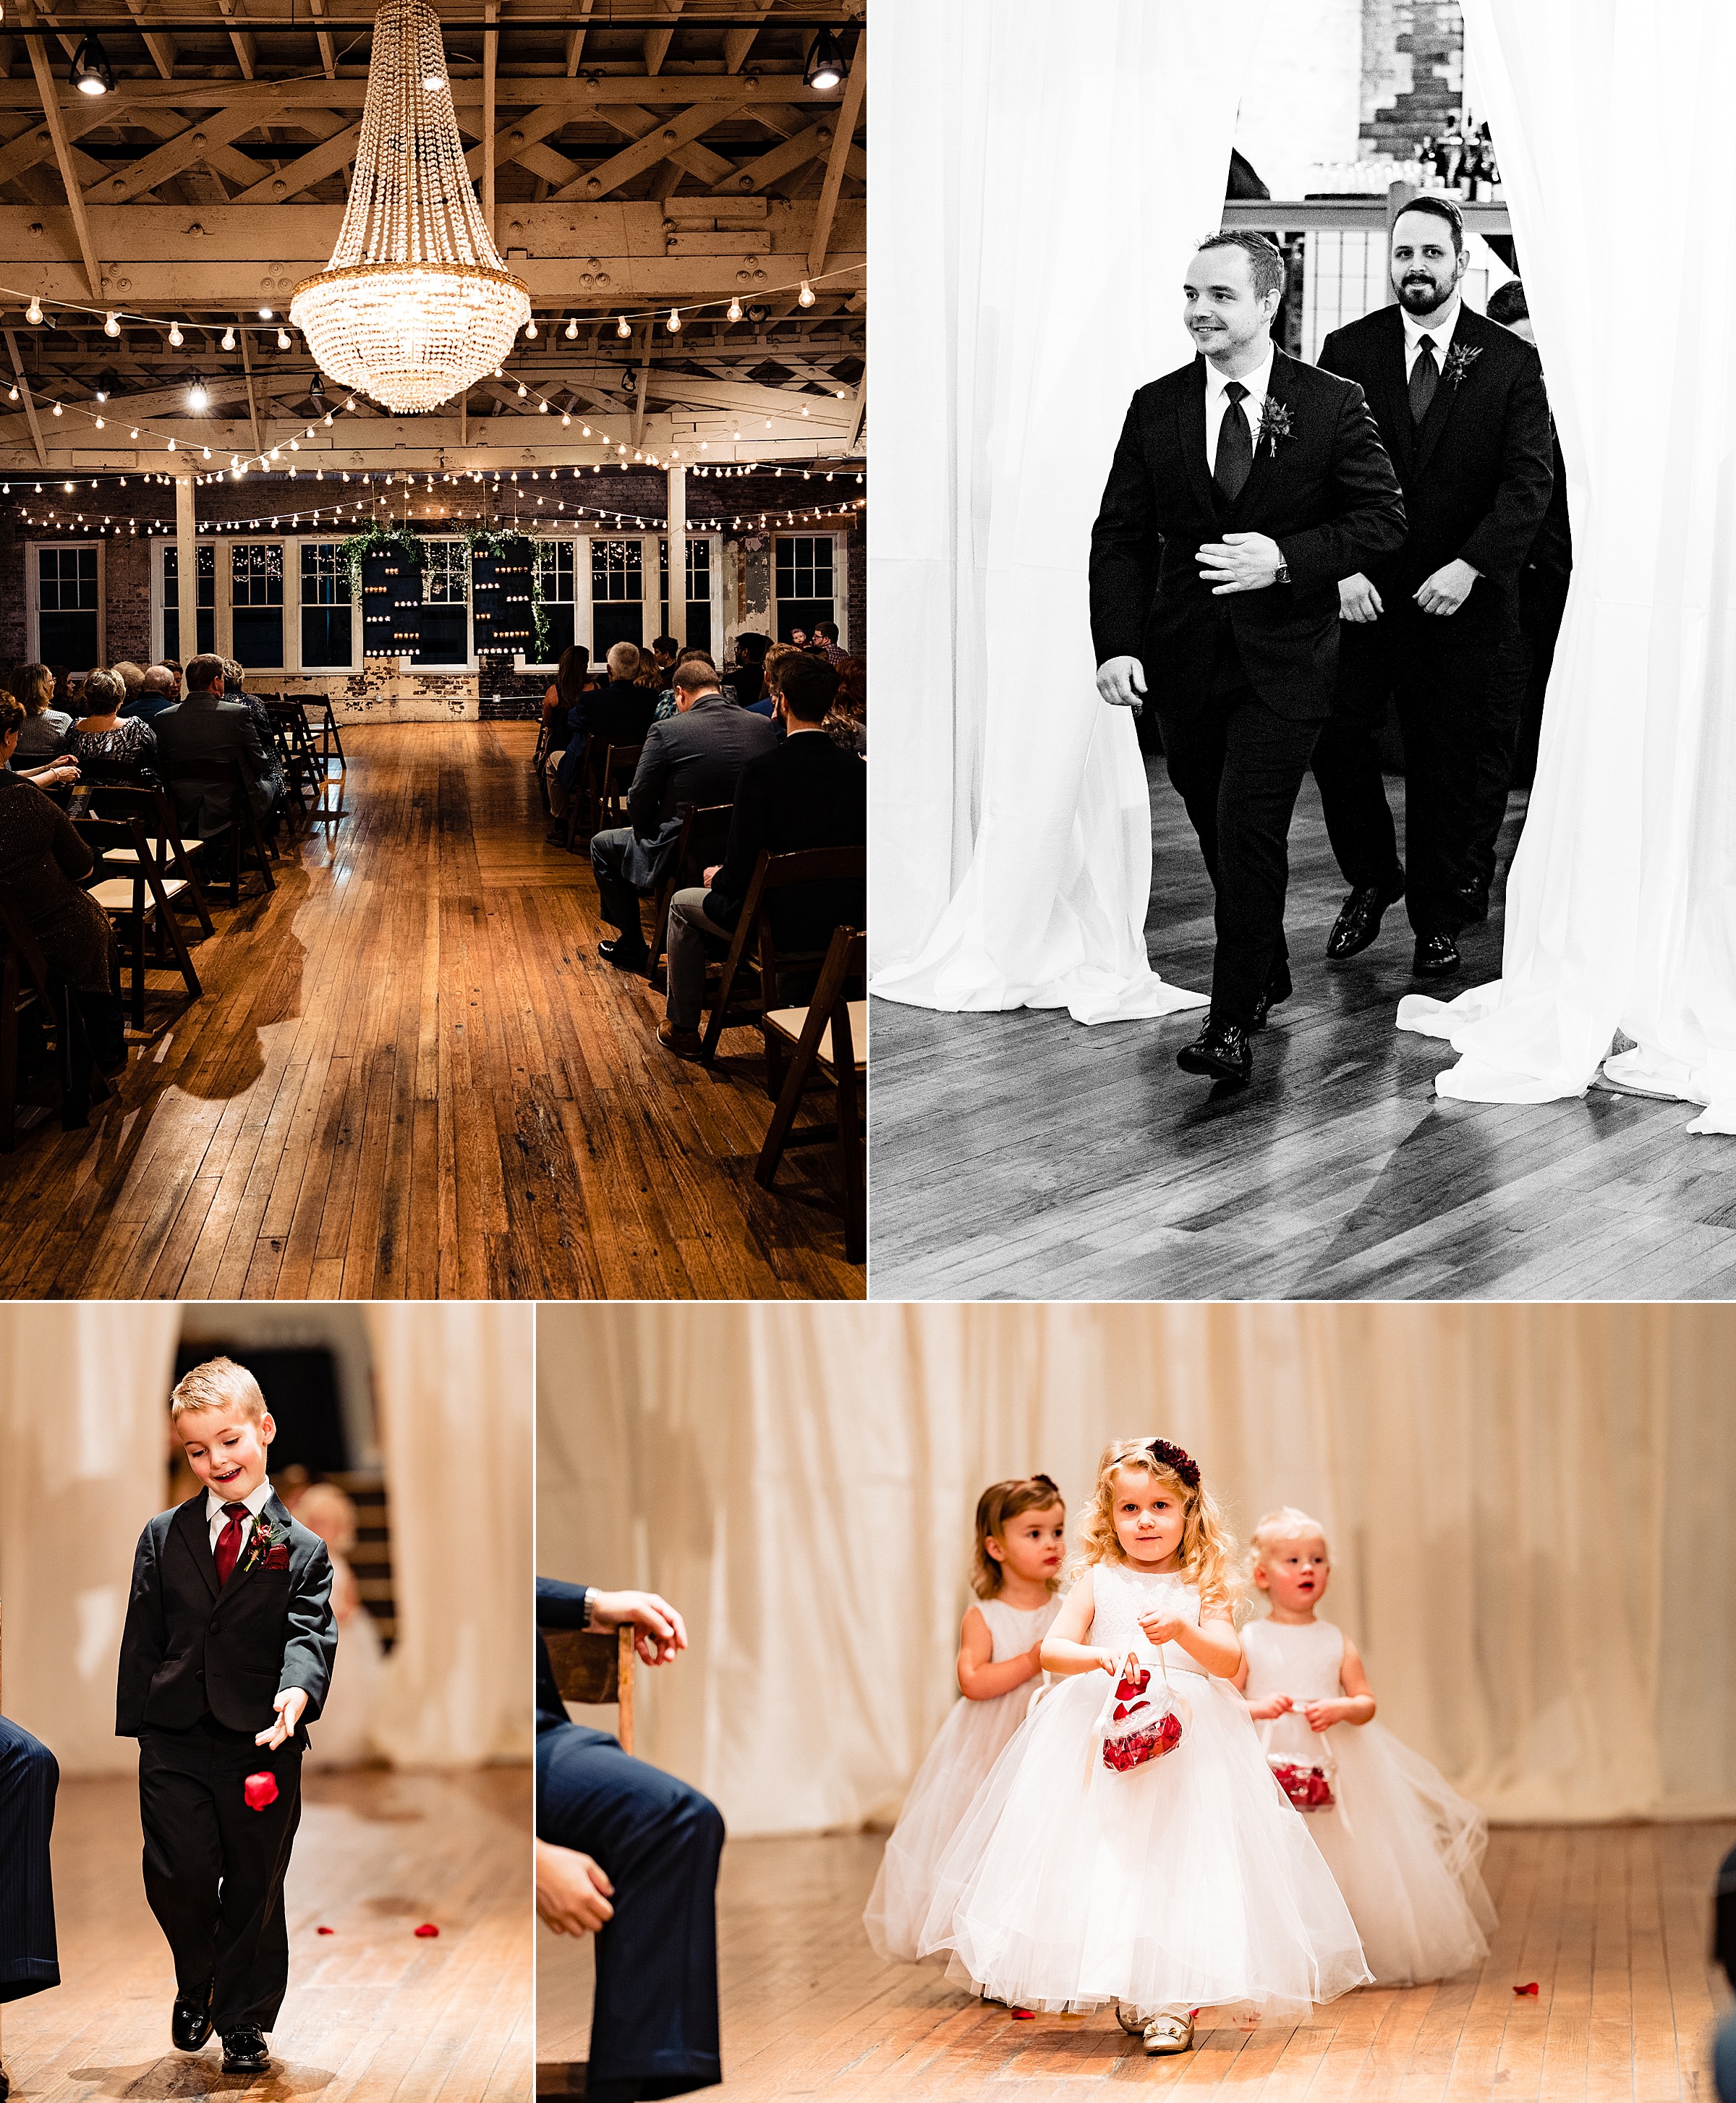 Collage of photos from a wedding ceremony, including a photo of the groom entering, a ring bearer dropping flower petals, and several flower girls carrying baskets. Wedding venue is the Stockroom in Raleigh, NC | kivusandcamera.com